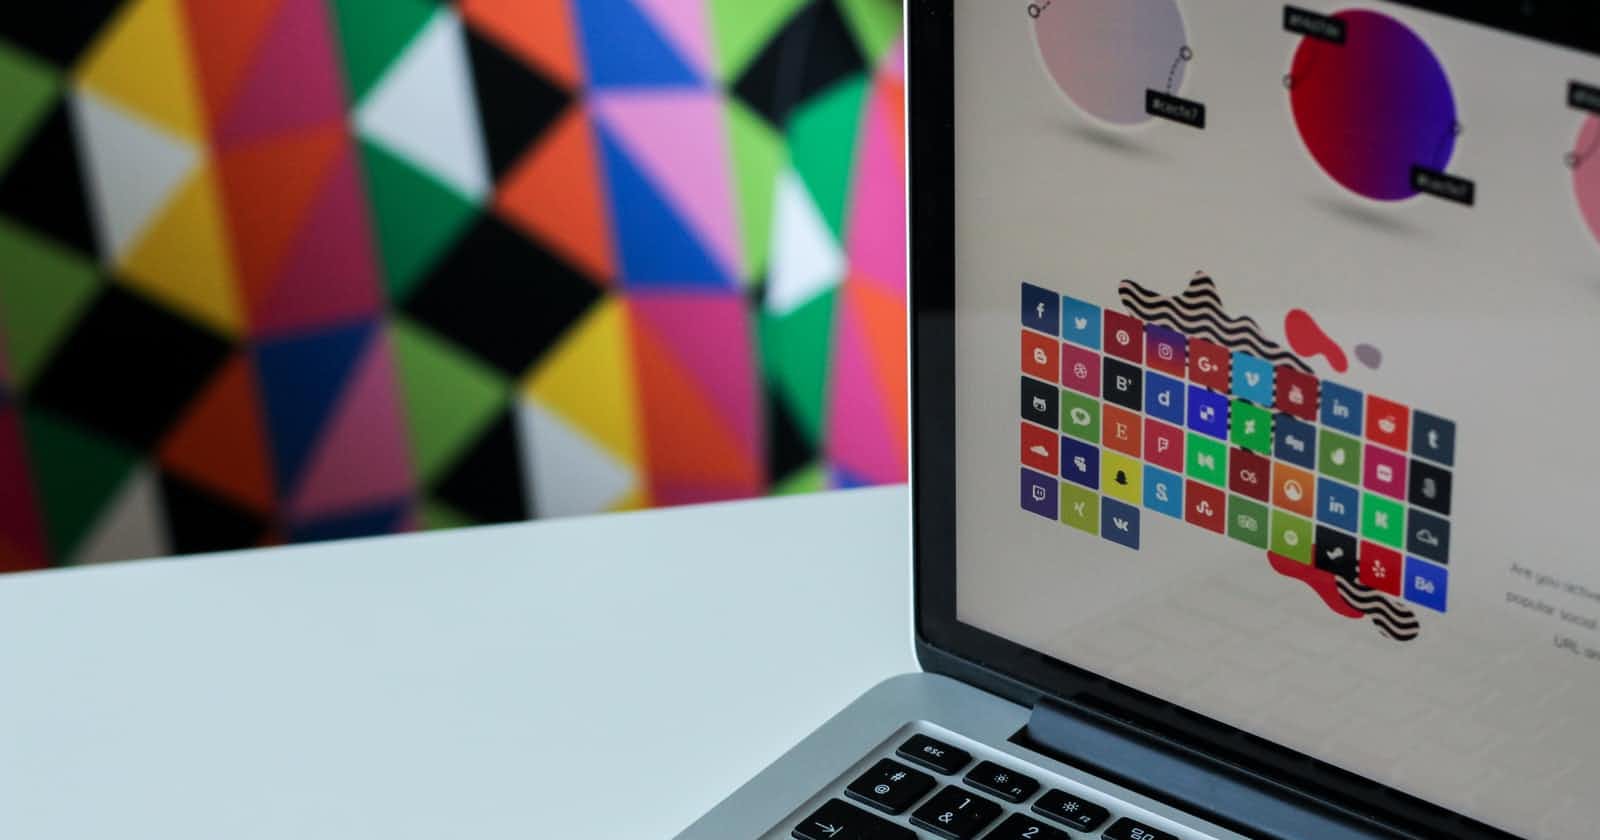 The 5 Best Apps for Graphic Designers in 2022.